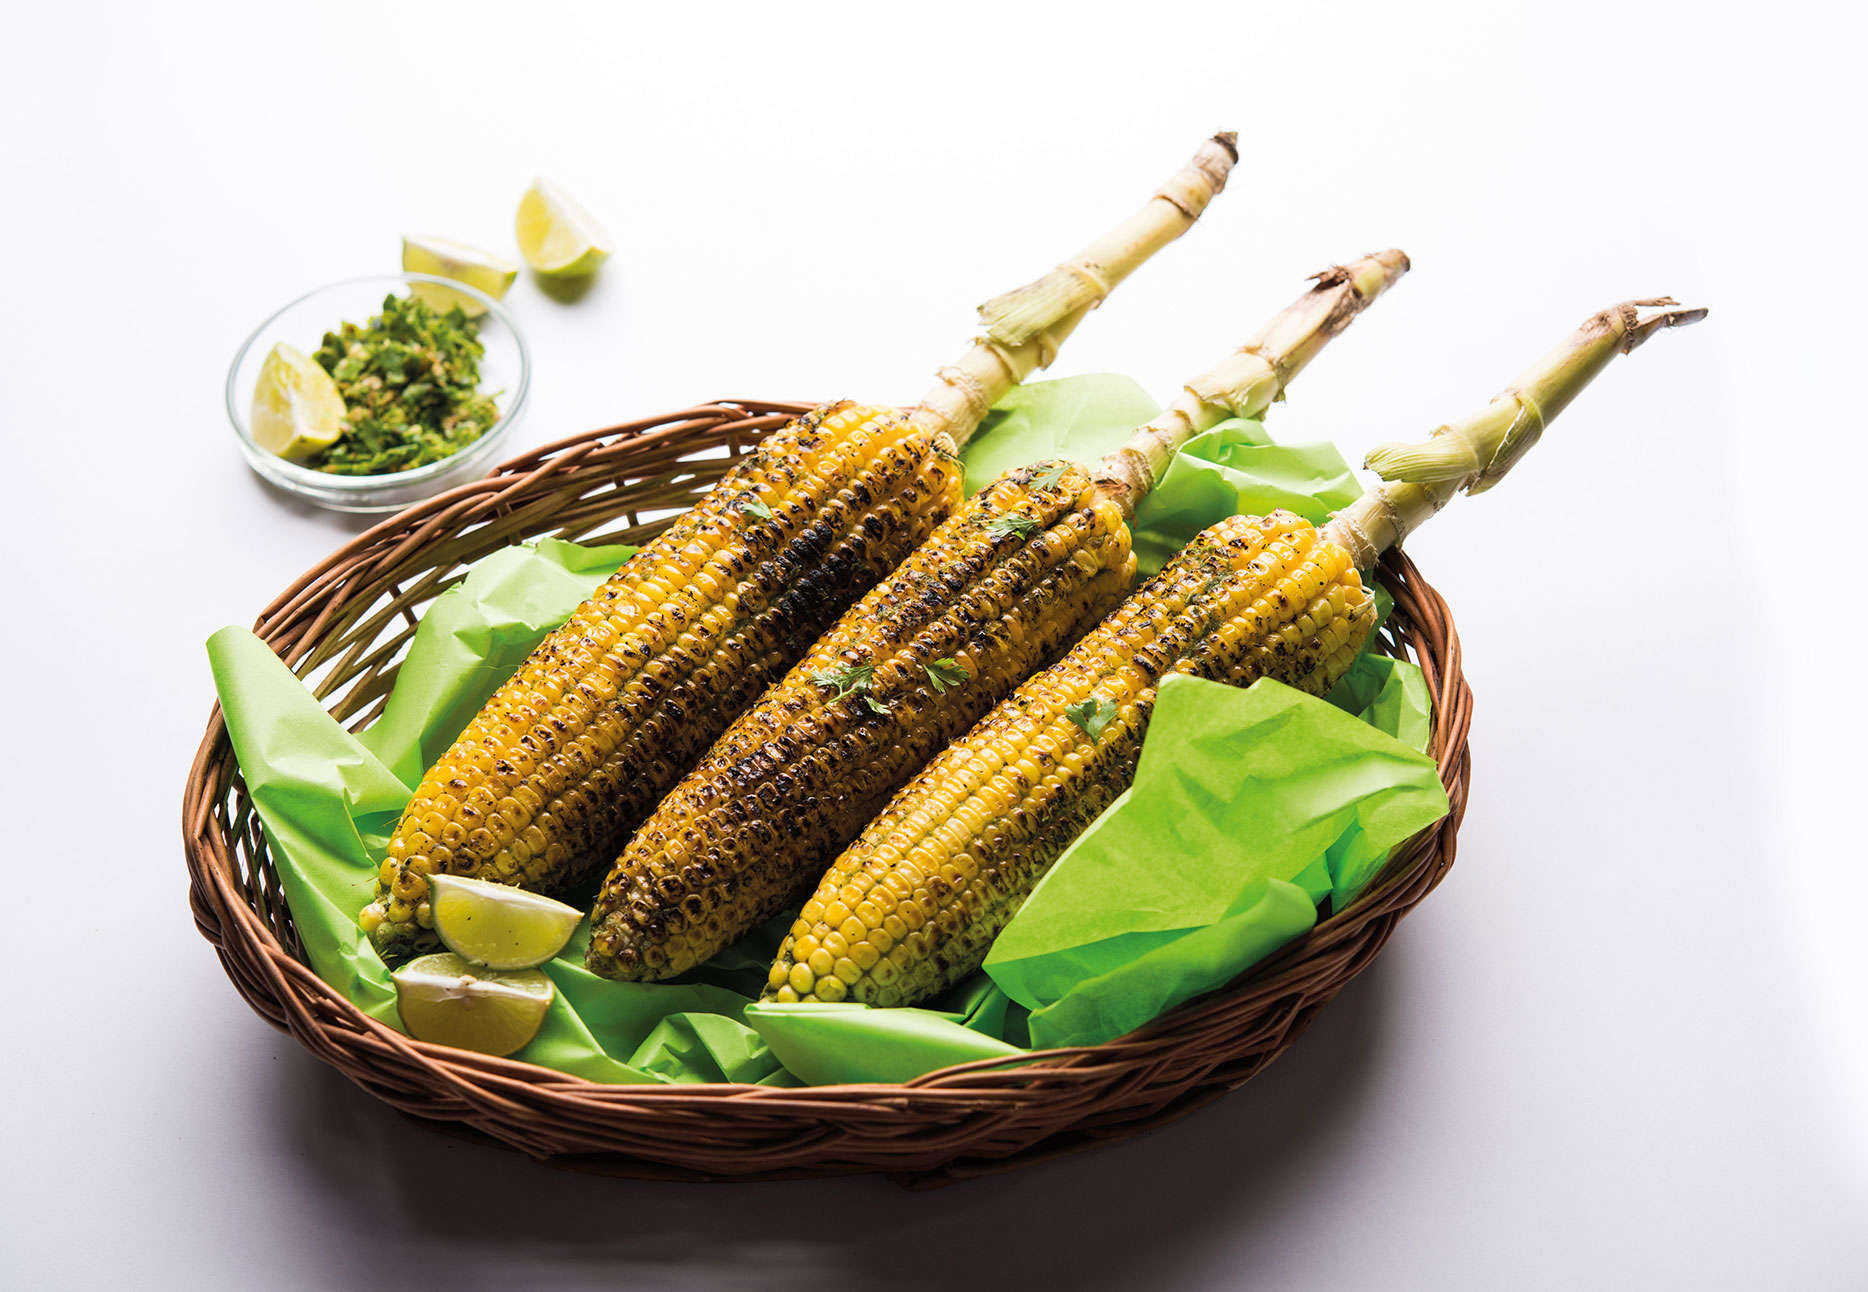 MonsoonCravings: Corn snacks with a twist - Times of India